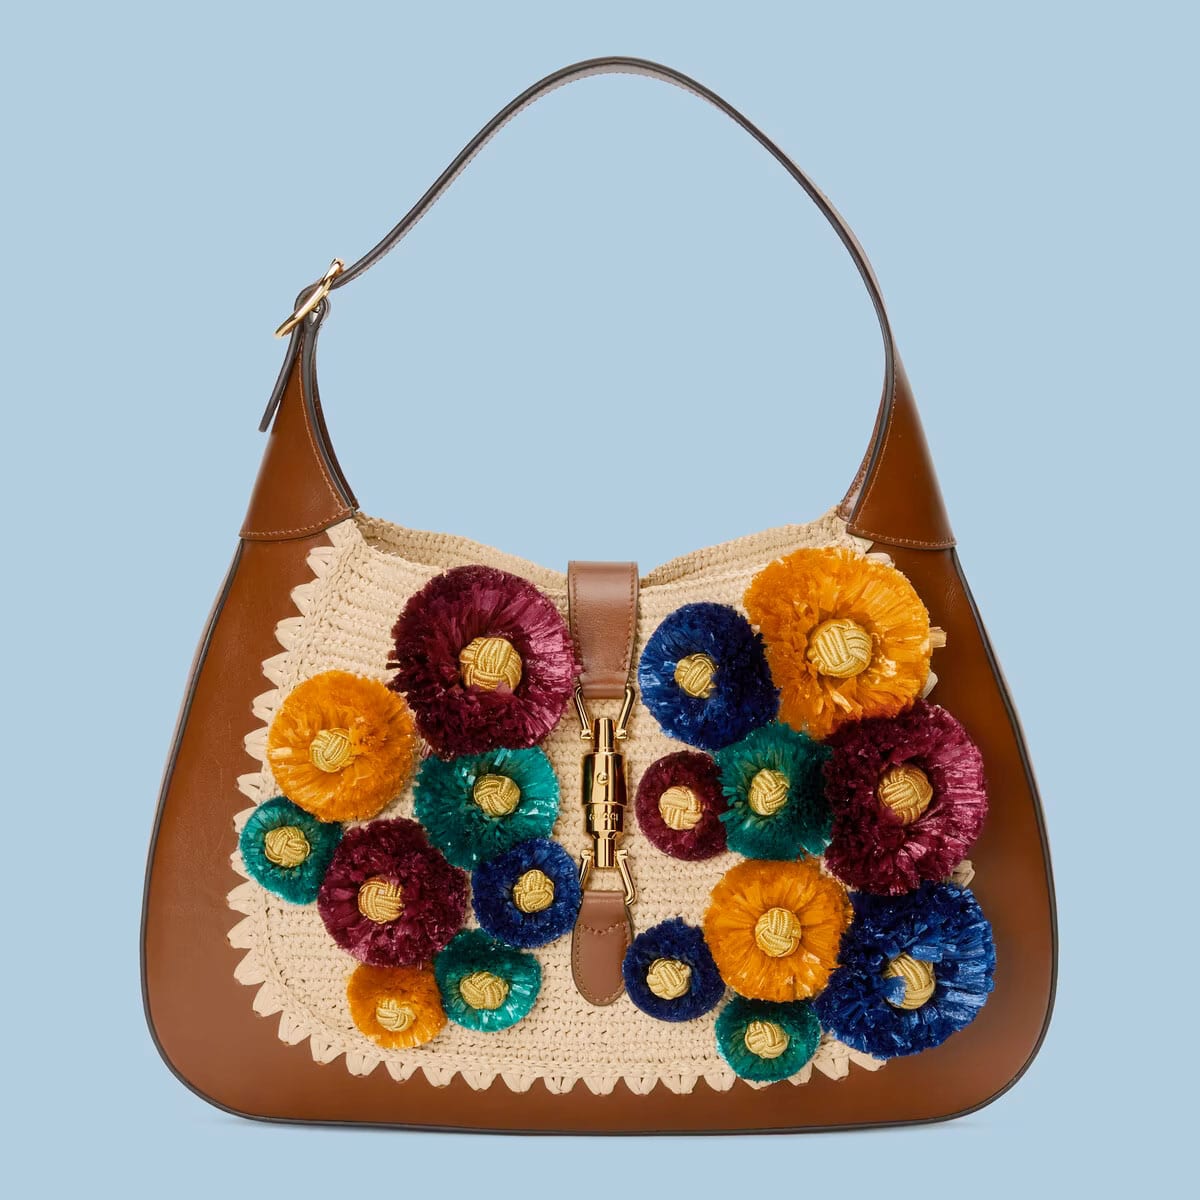 I've Become Re-Obsessed With the Gucci Jackie - PurseBlog